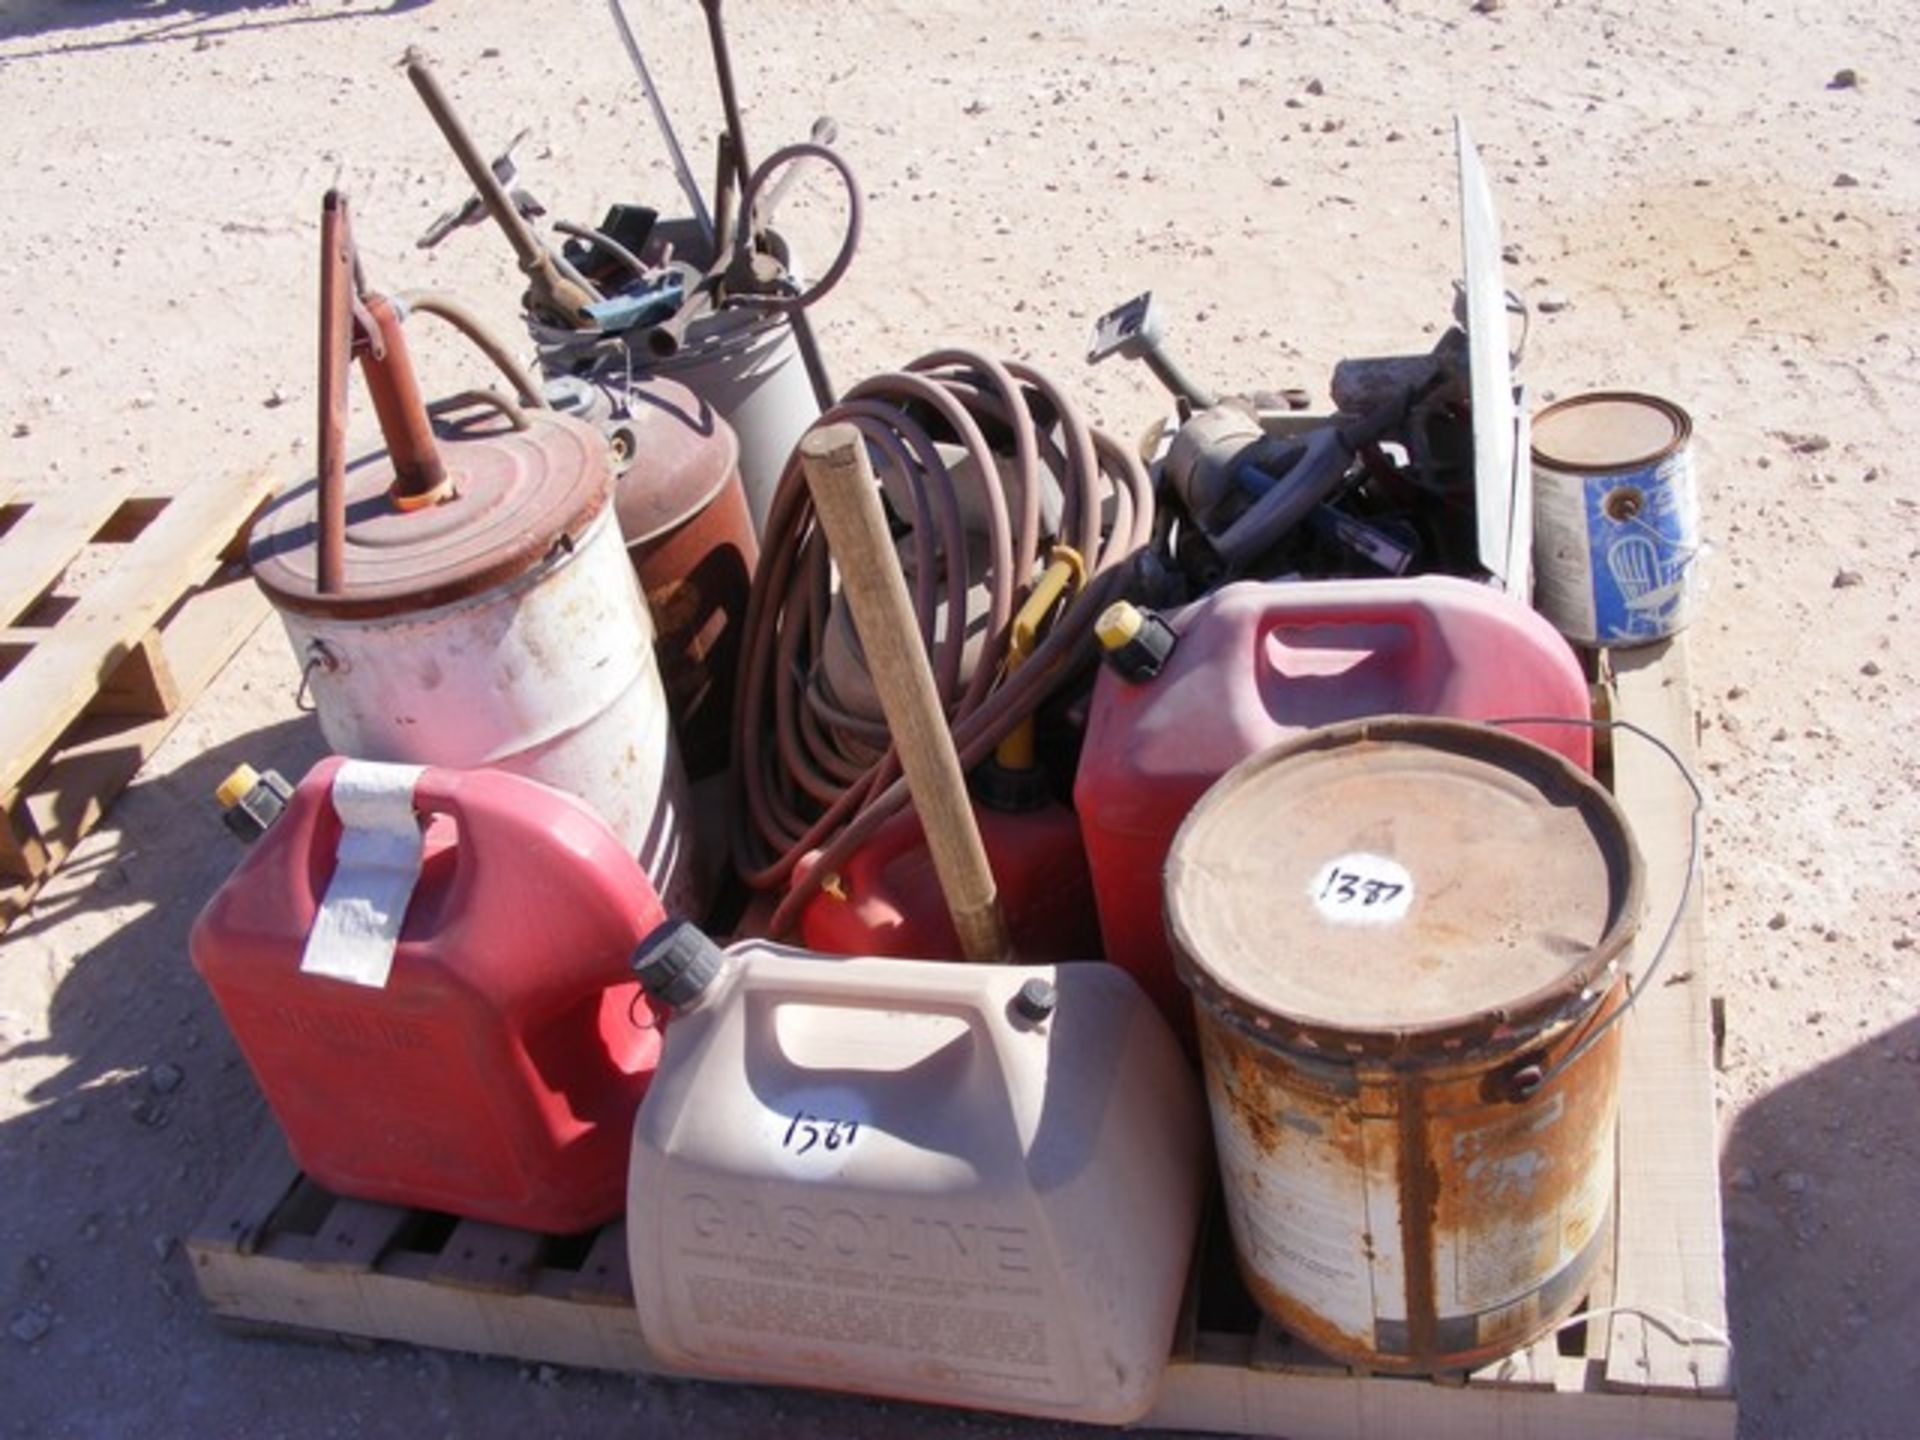 Located in YARD 1 - Midland, TX (9671) MISC GAS CANS, OIL CANS, AIR PUMPS, BRAKE BLEEDER, MISC TOOLS